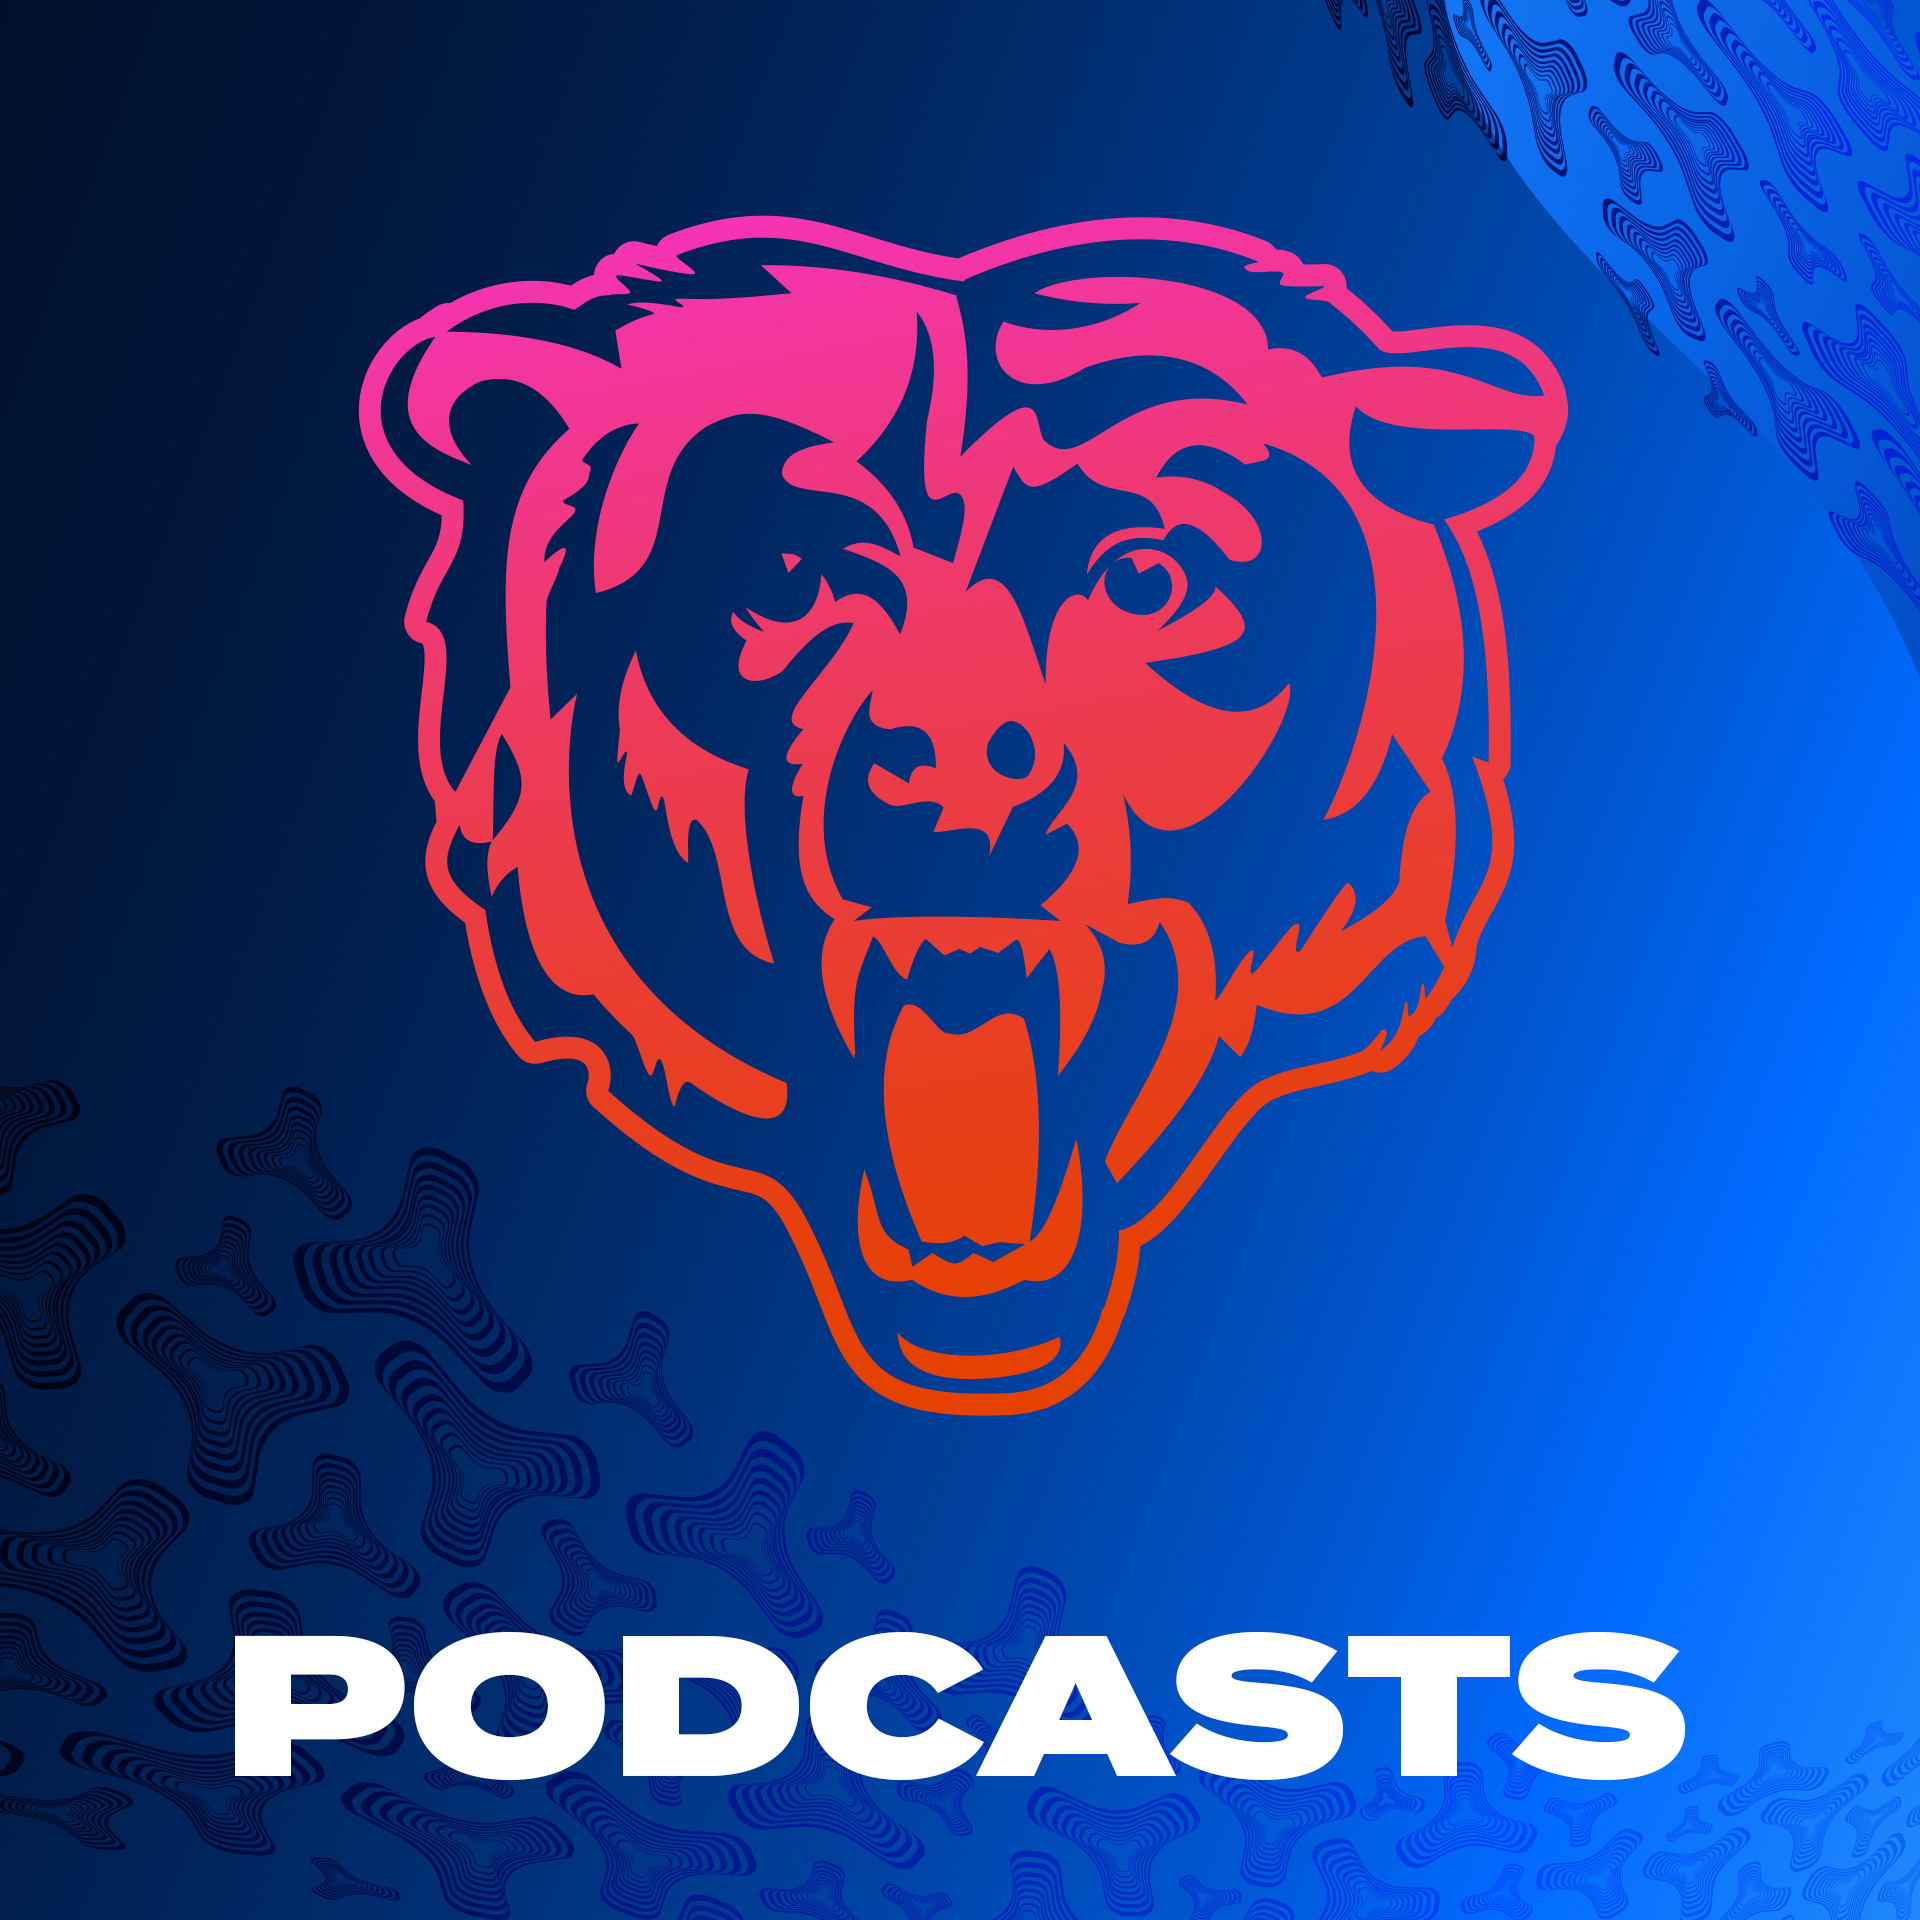 Voice of the Chargers on what Allen, Everett bring to the Bears | Bears Weekly